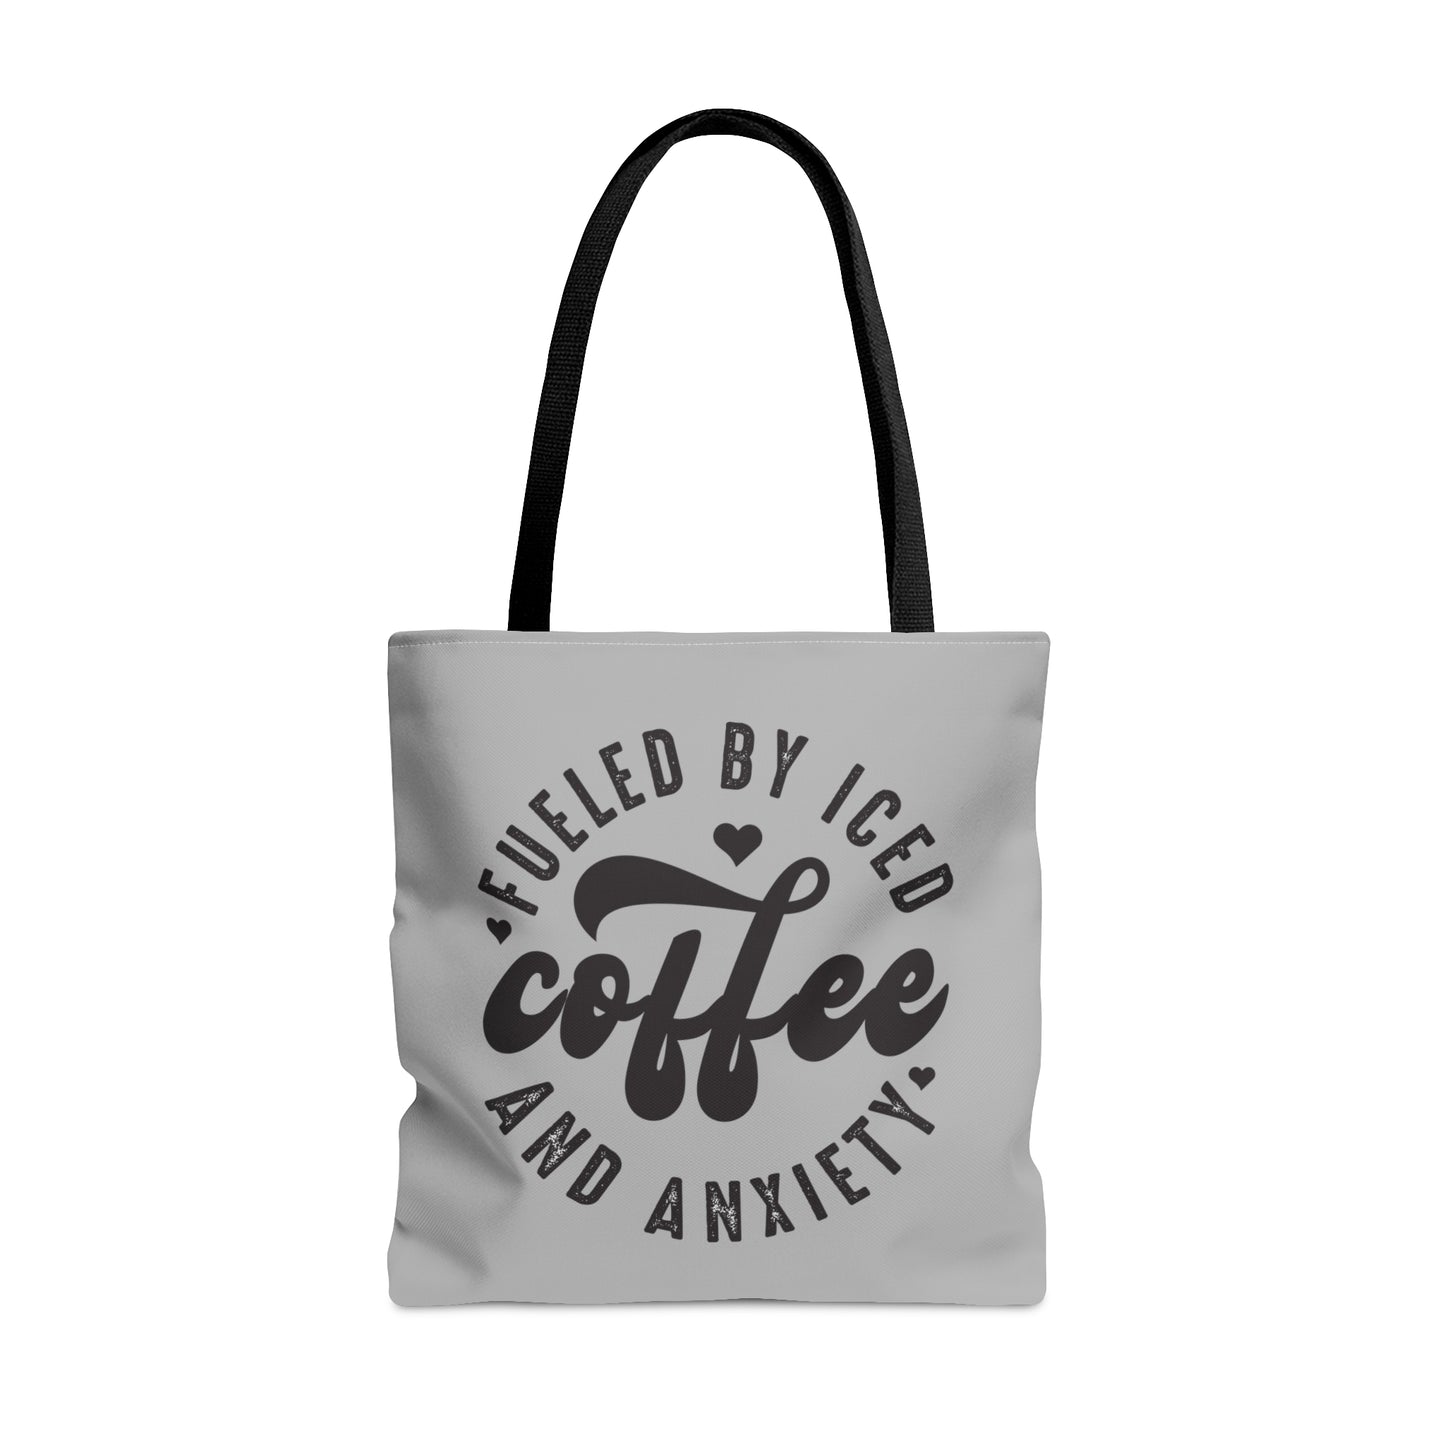 Fueled by Iced Coffee and Anxiety Tote Bag